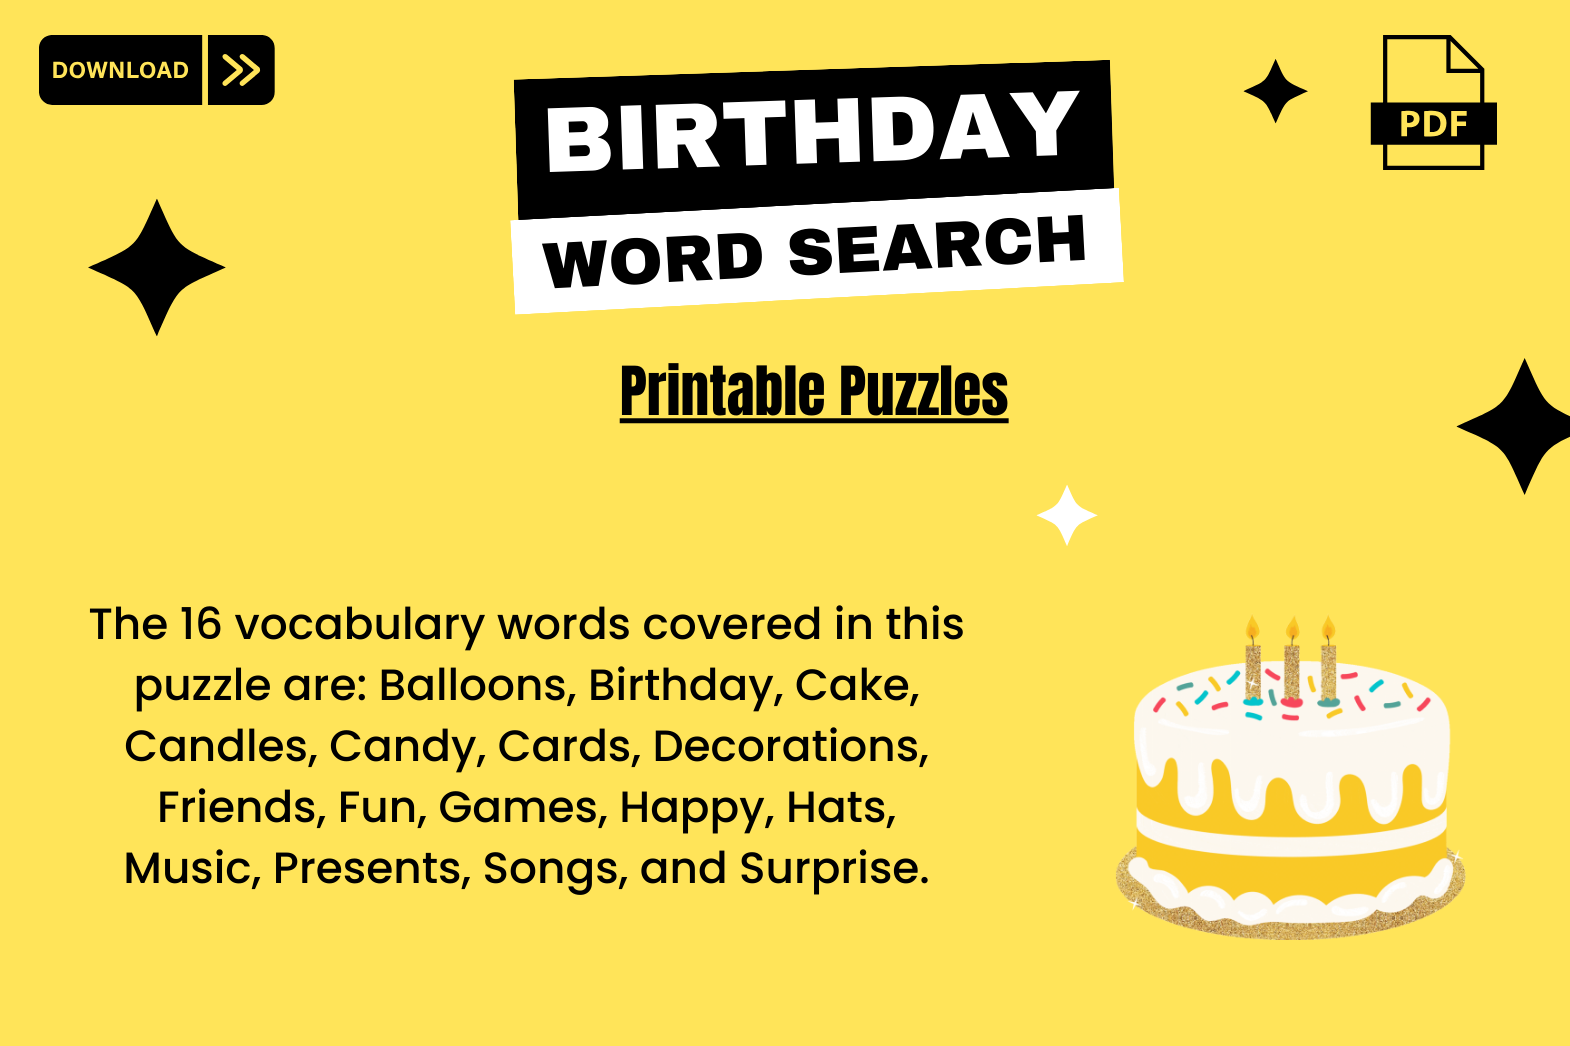 Birthday Word Search Printable Puzzles